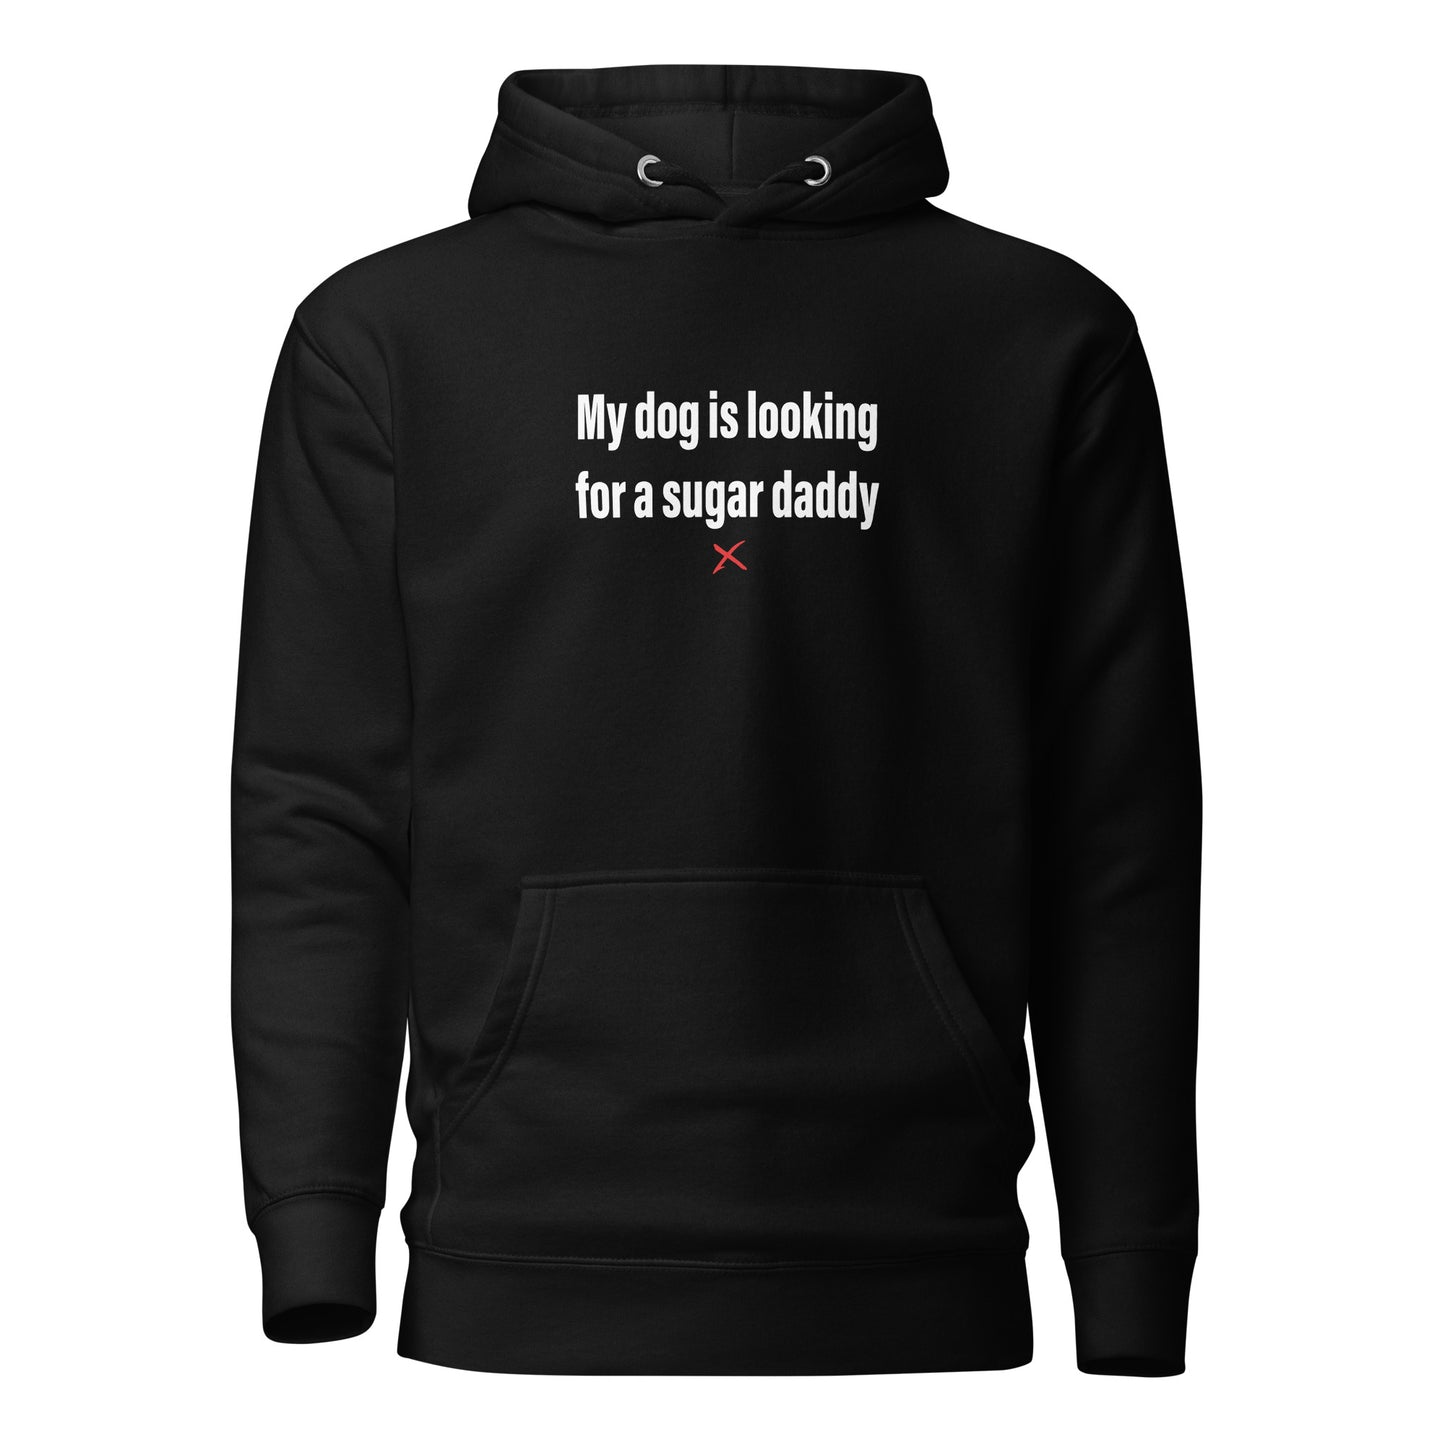 My dog is looking for a sugar daddy - Hoodie